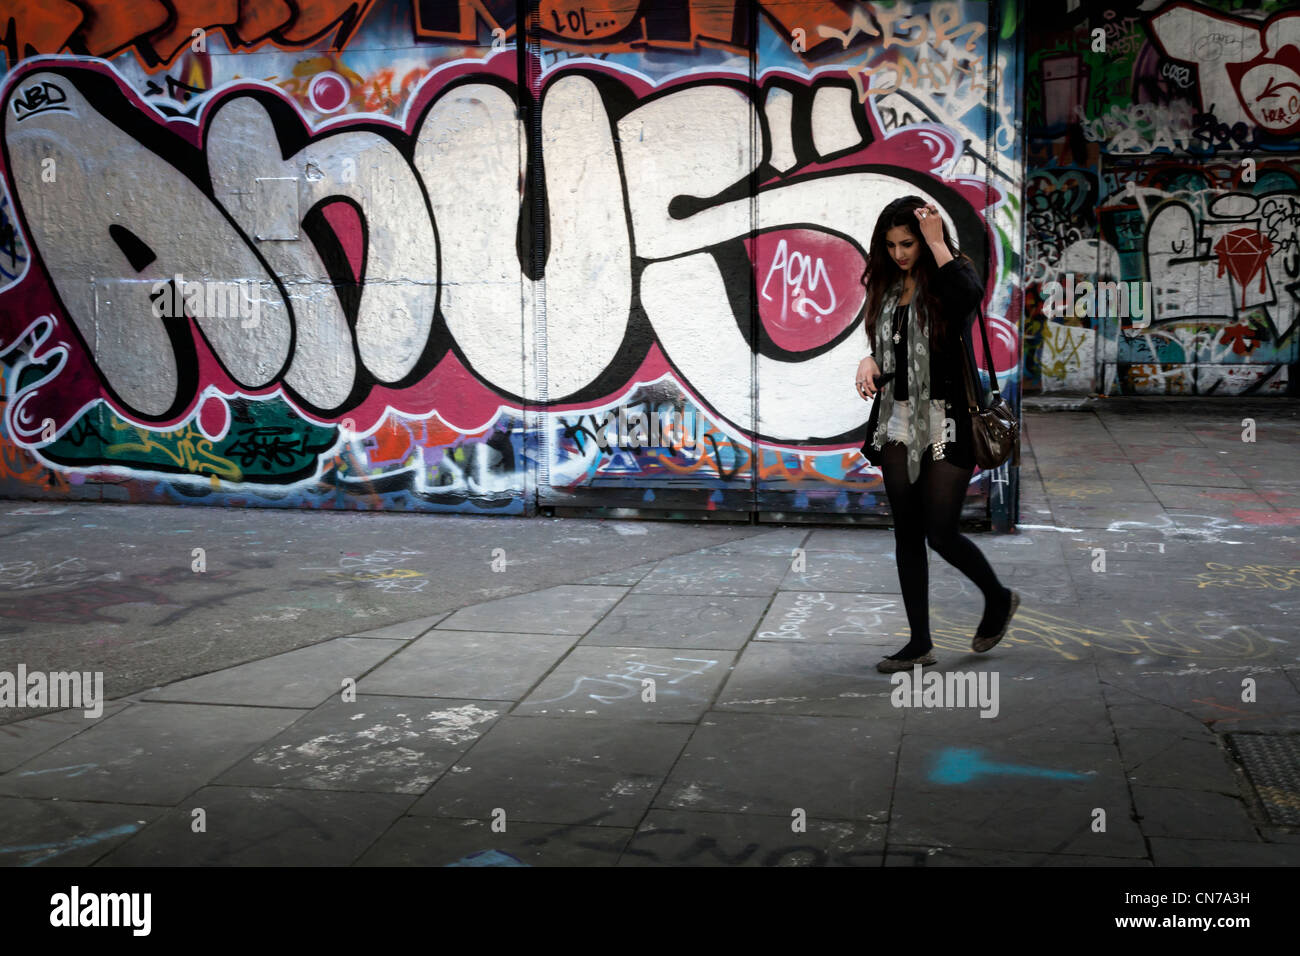 Graffit depicting the word 'anus' and girl looking perplexed Stock Photo